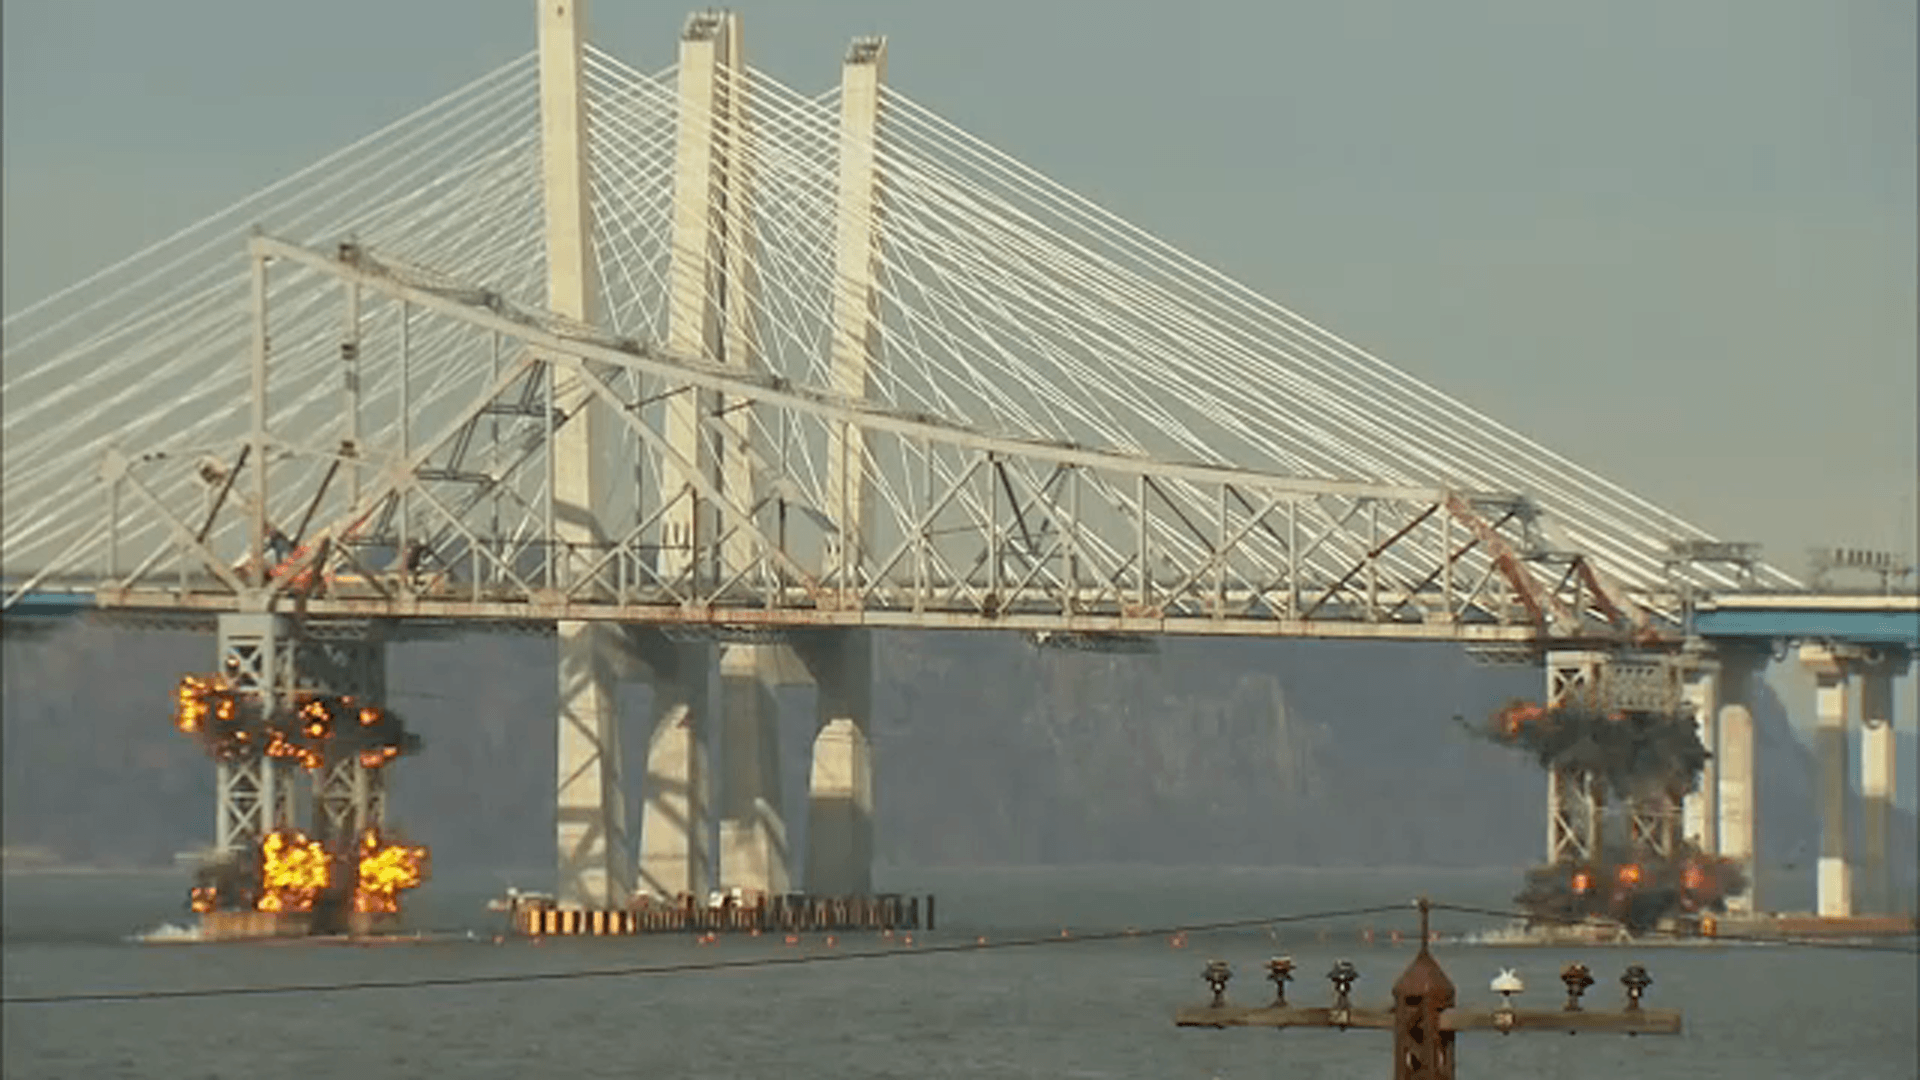 Old Tappan Zee Bridge comes down in controlled demolition